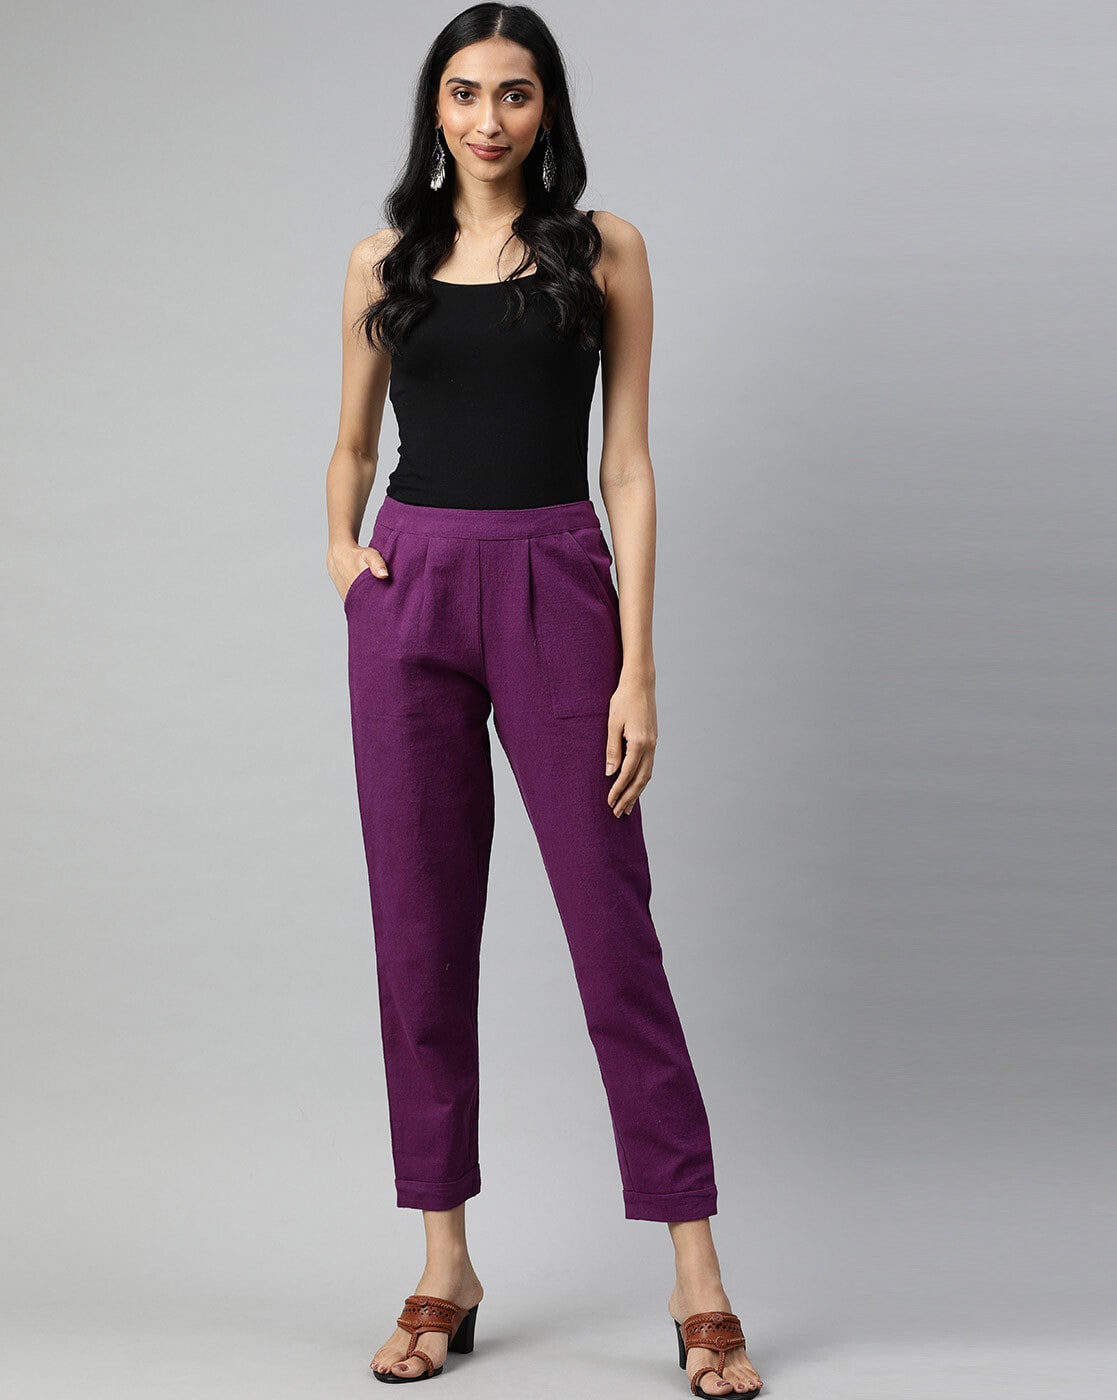 What Color Pants To Wear With Purple Shirt For Women?